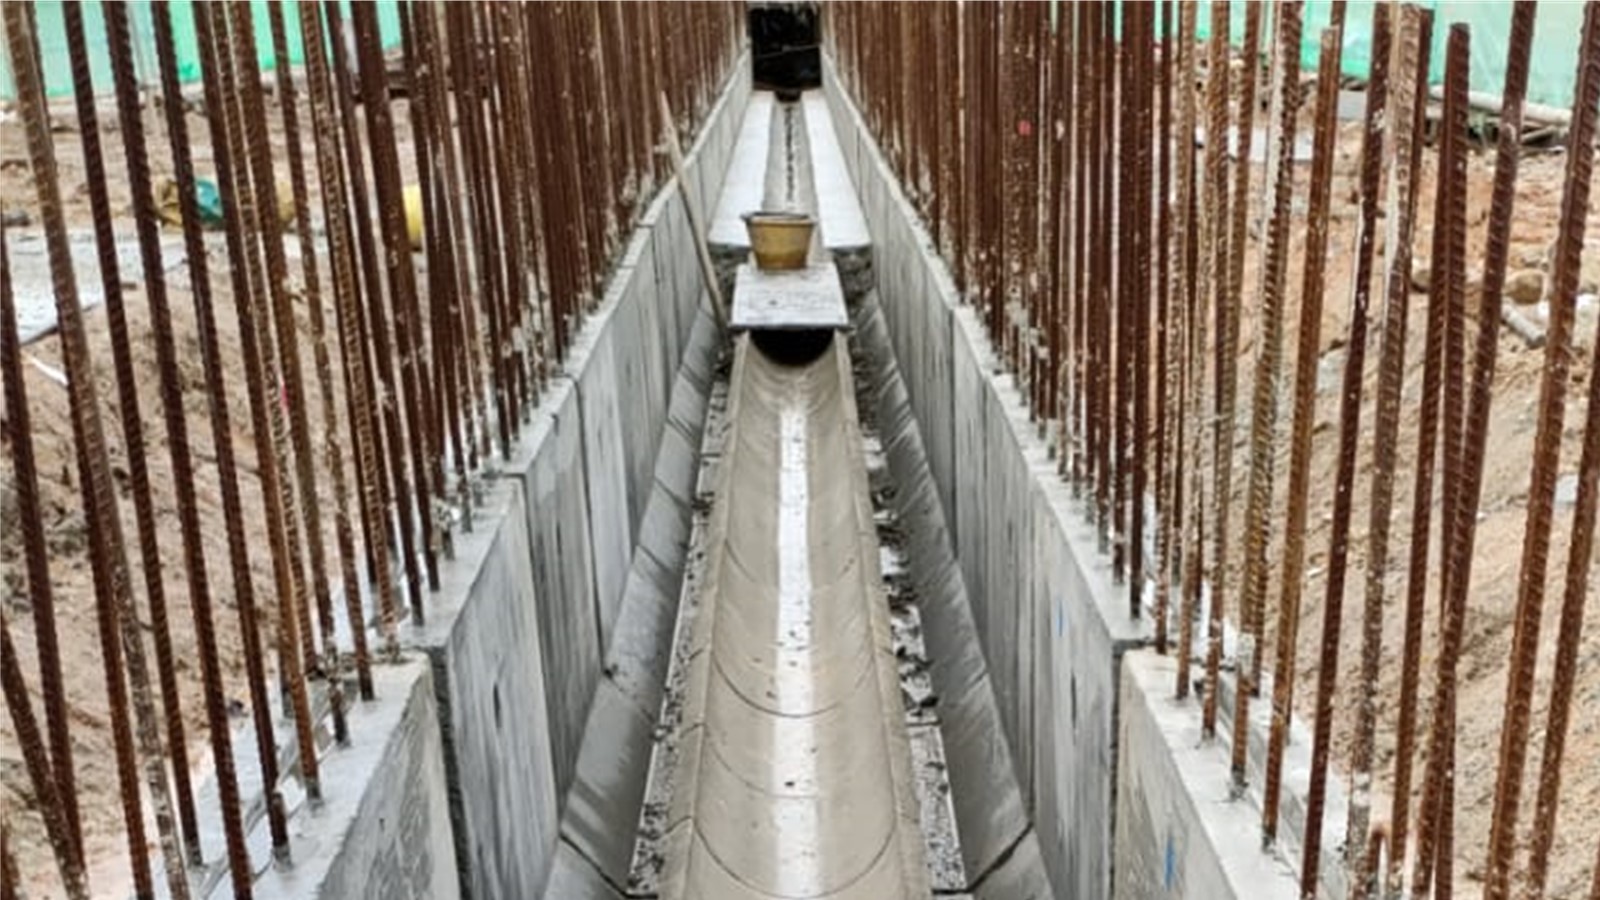 Protoypes of the drain channels have been installed at a JTC construction project near Tuas Link MRT station.